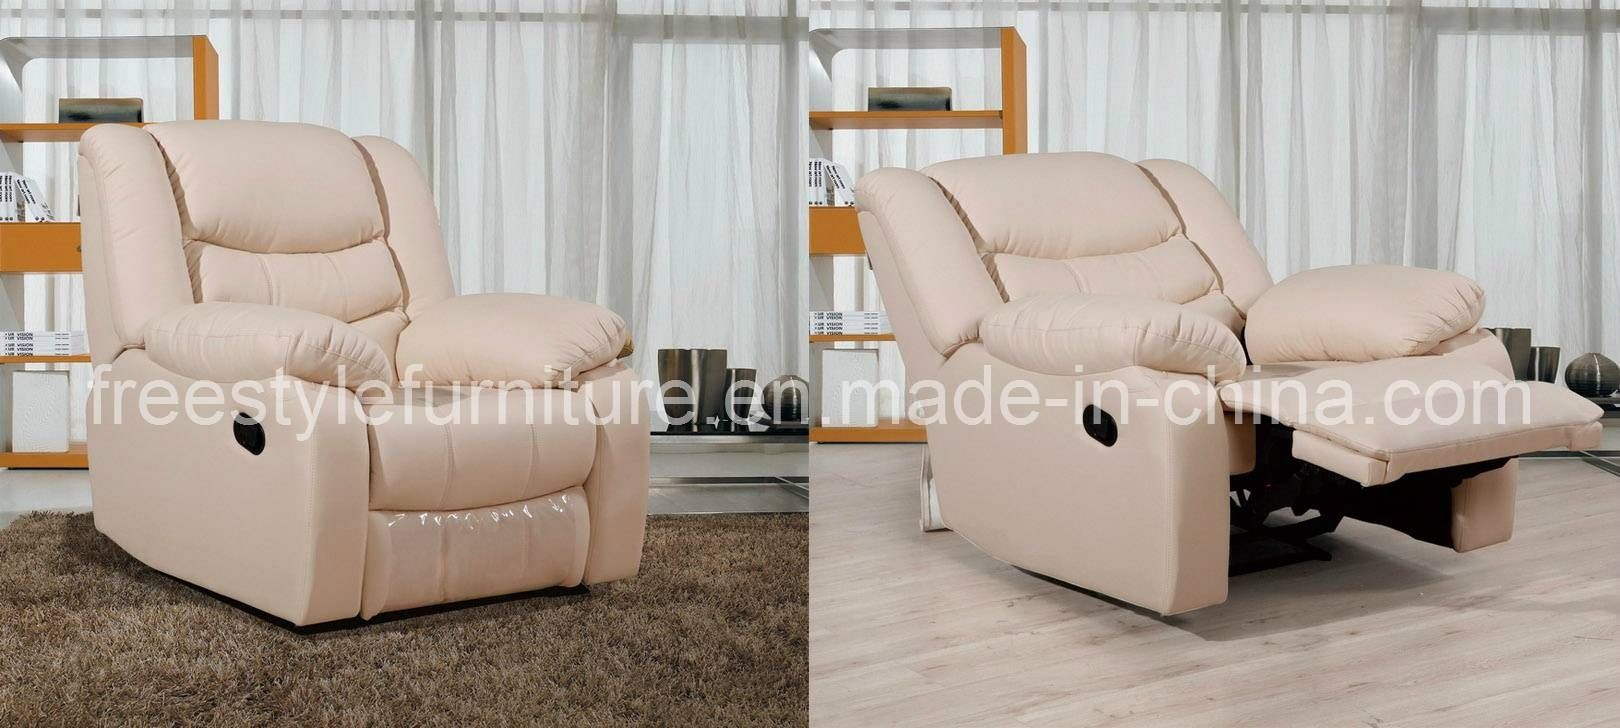 Sofas Center : Rocking Chairs Sofa Targetsofa Chair For With Regard To Sofa Rocking Chairs (Photo 1 of 30)